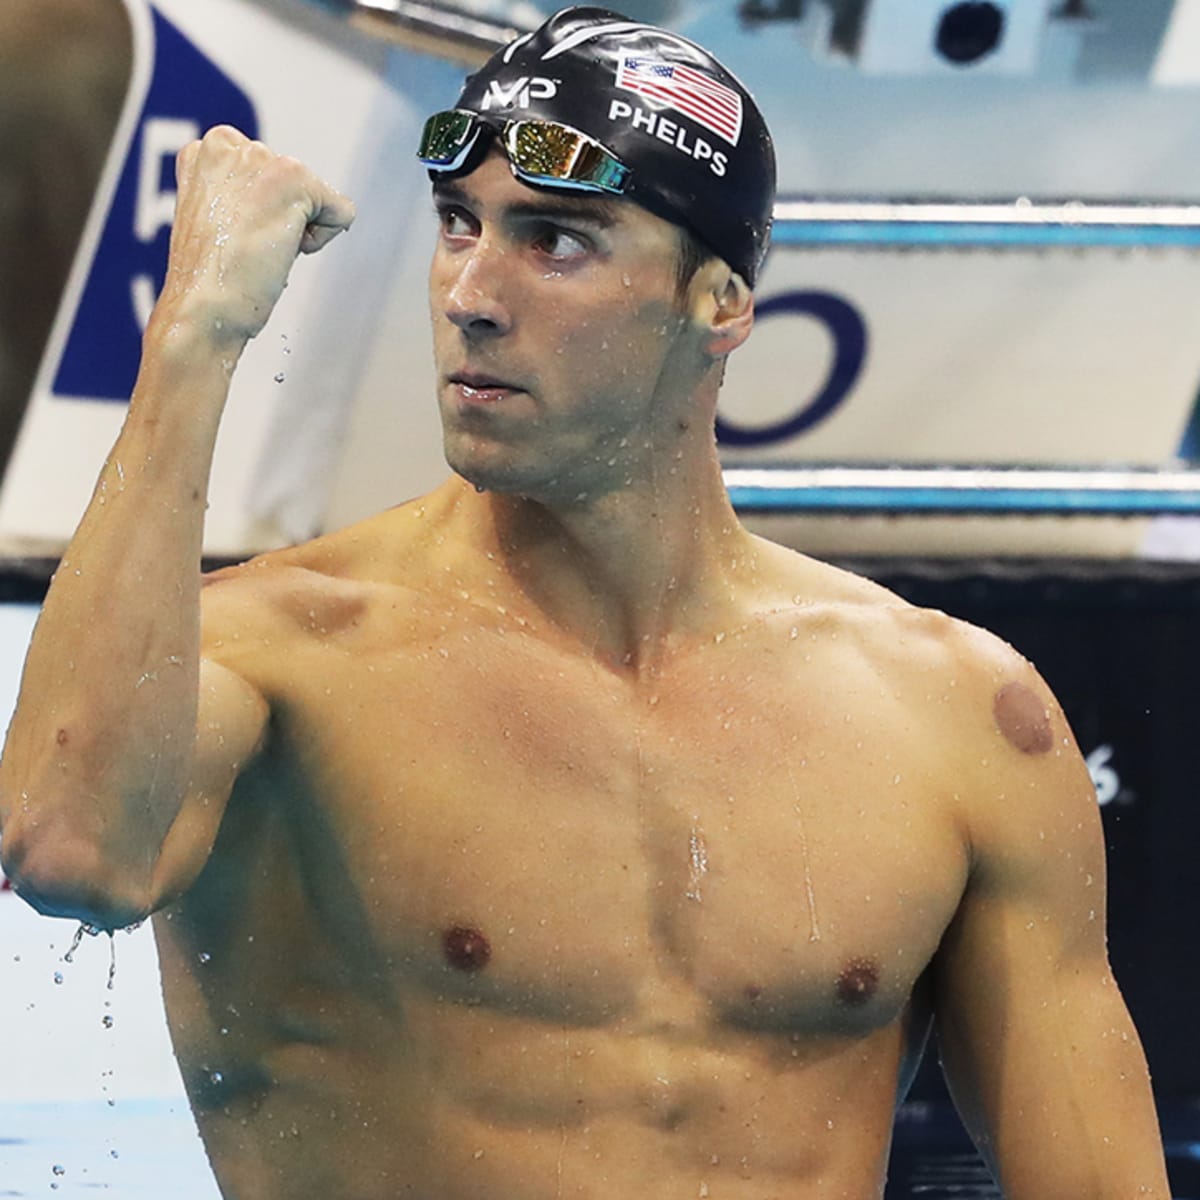 Michael Phelps redeems 2012 loss with latest Rio golds